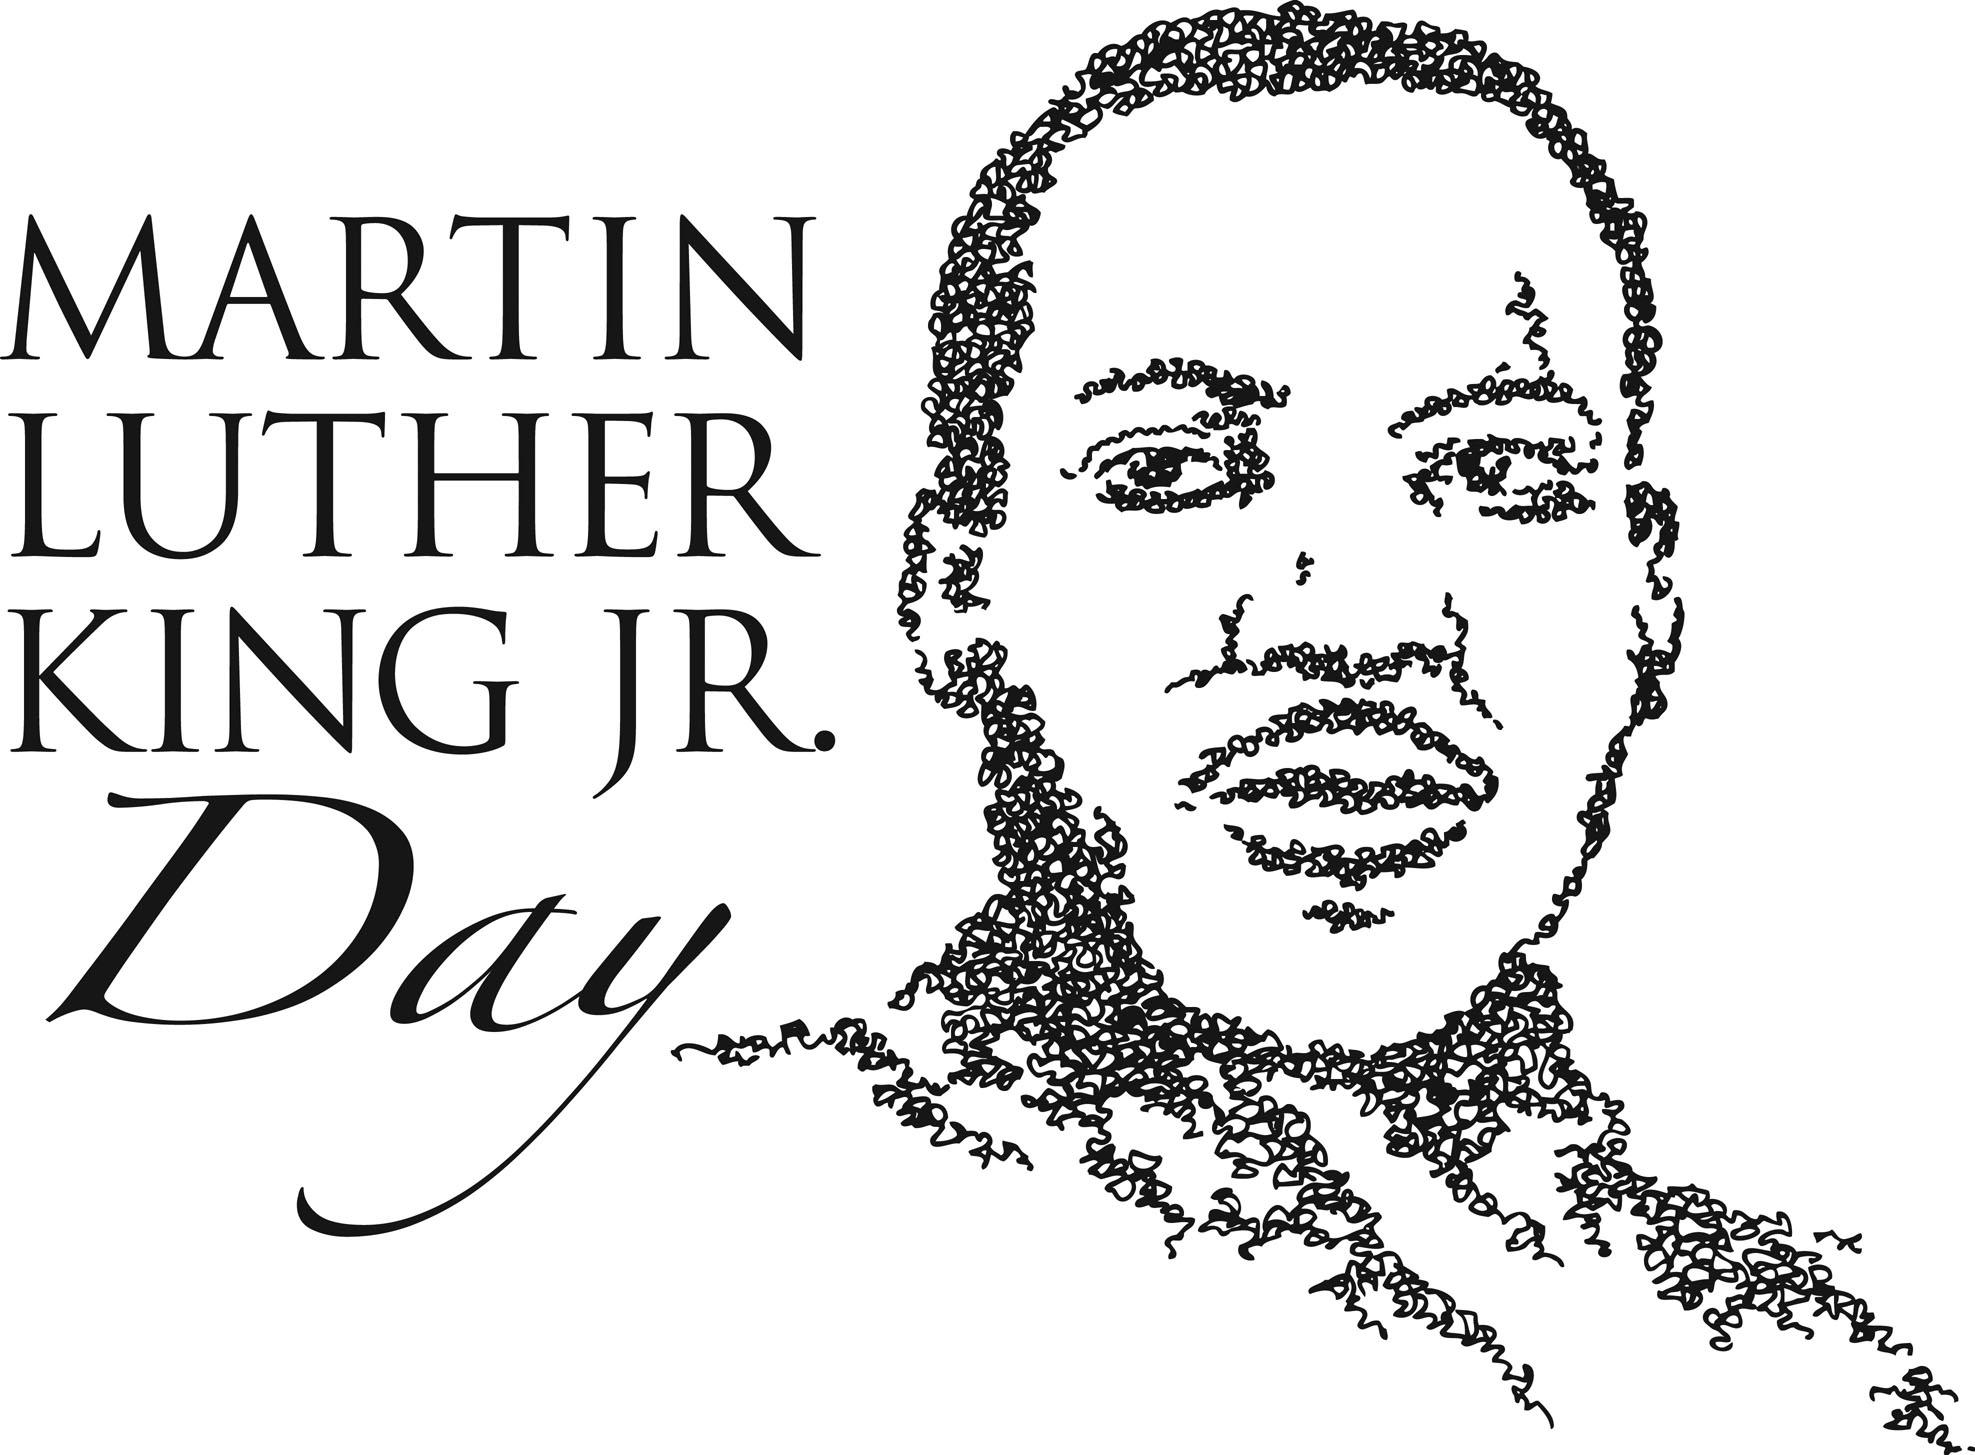 Martin Luther King Jr. Day 2020 Wallpapers Wallpaper Cave